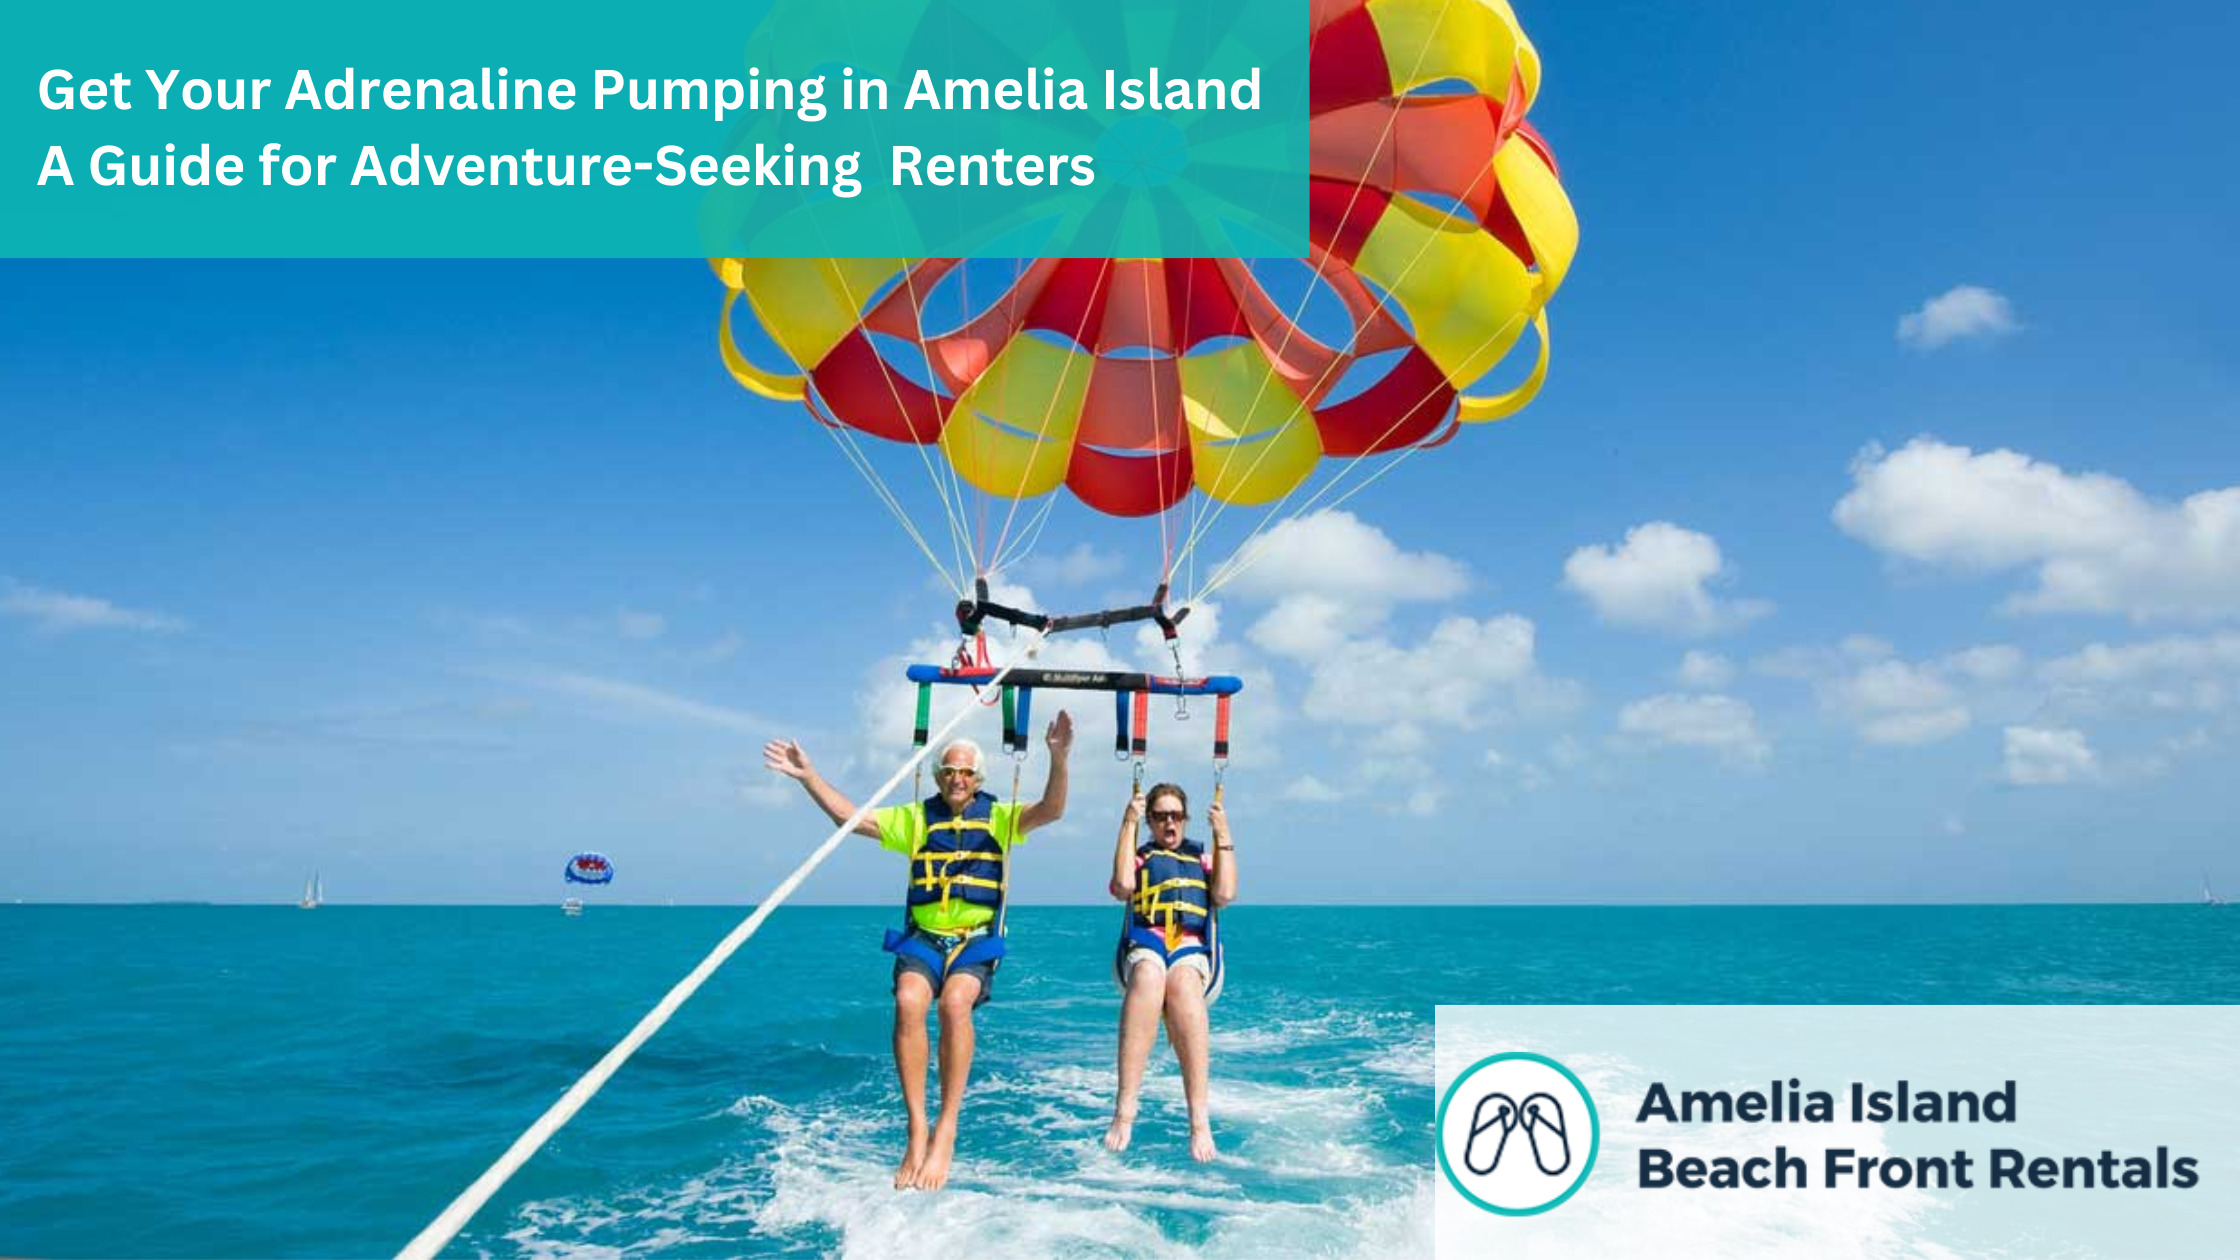 Get Your Adrenaline Pumping in Amelia Island A Guide for Adventure Seeking Renters 1 - Get Your Adrenaline Pumping in Amelia Island: A Guide for Adventure-Seeking Renters